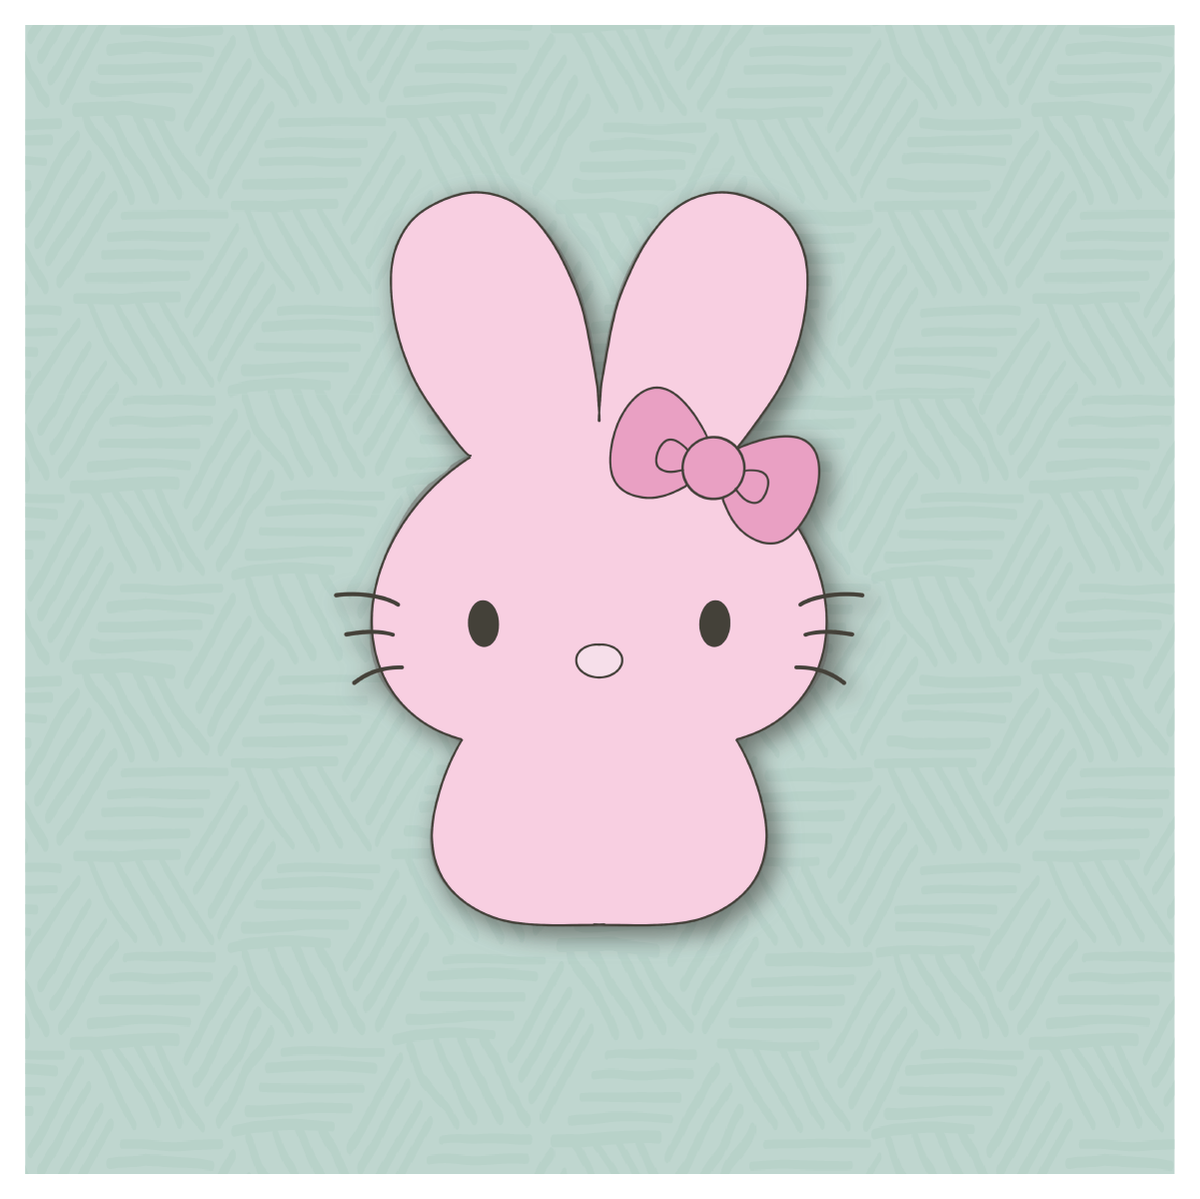 Kitty Mallow Bunny Cookie Cutter